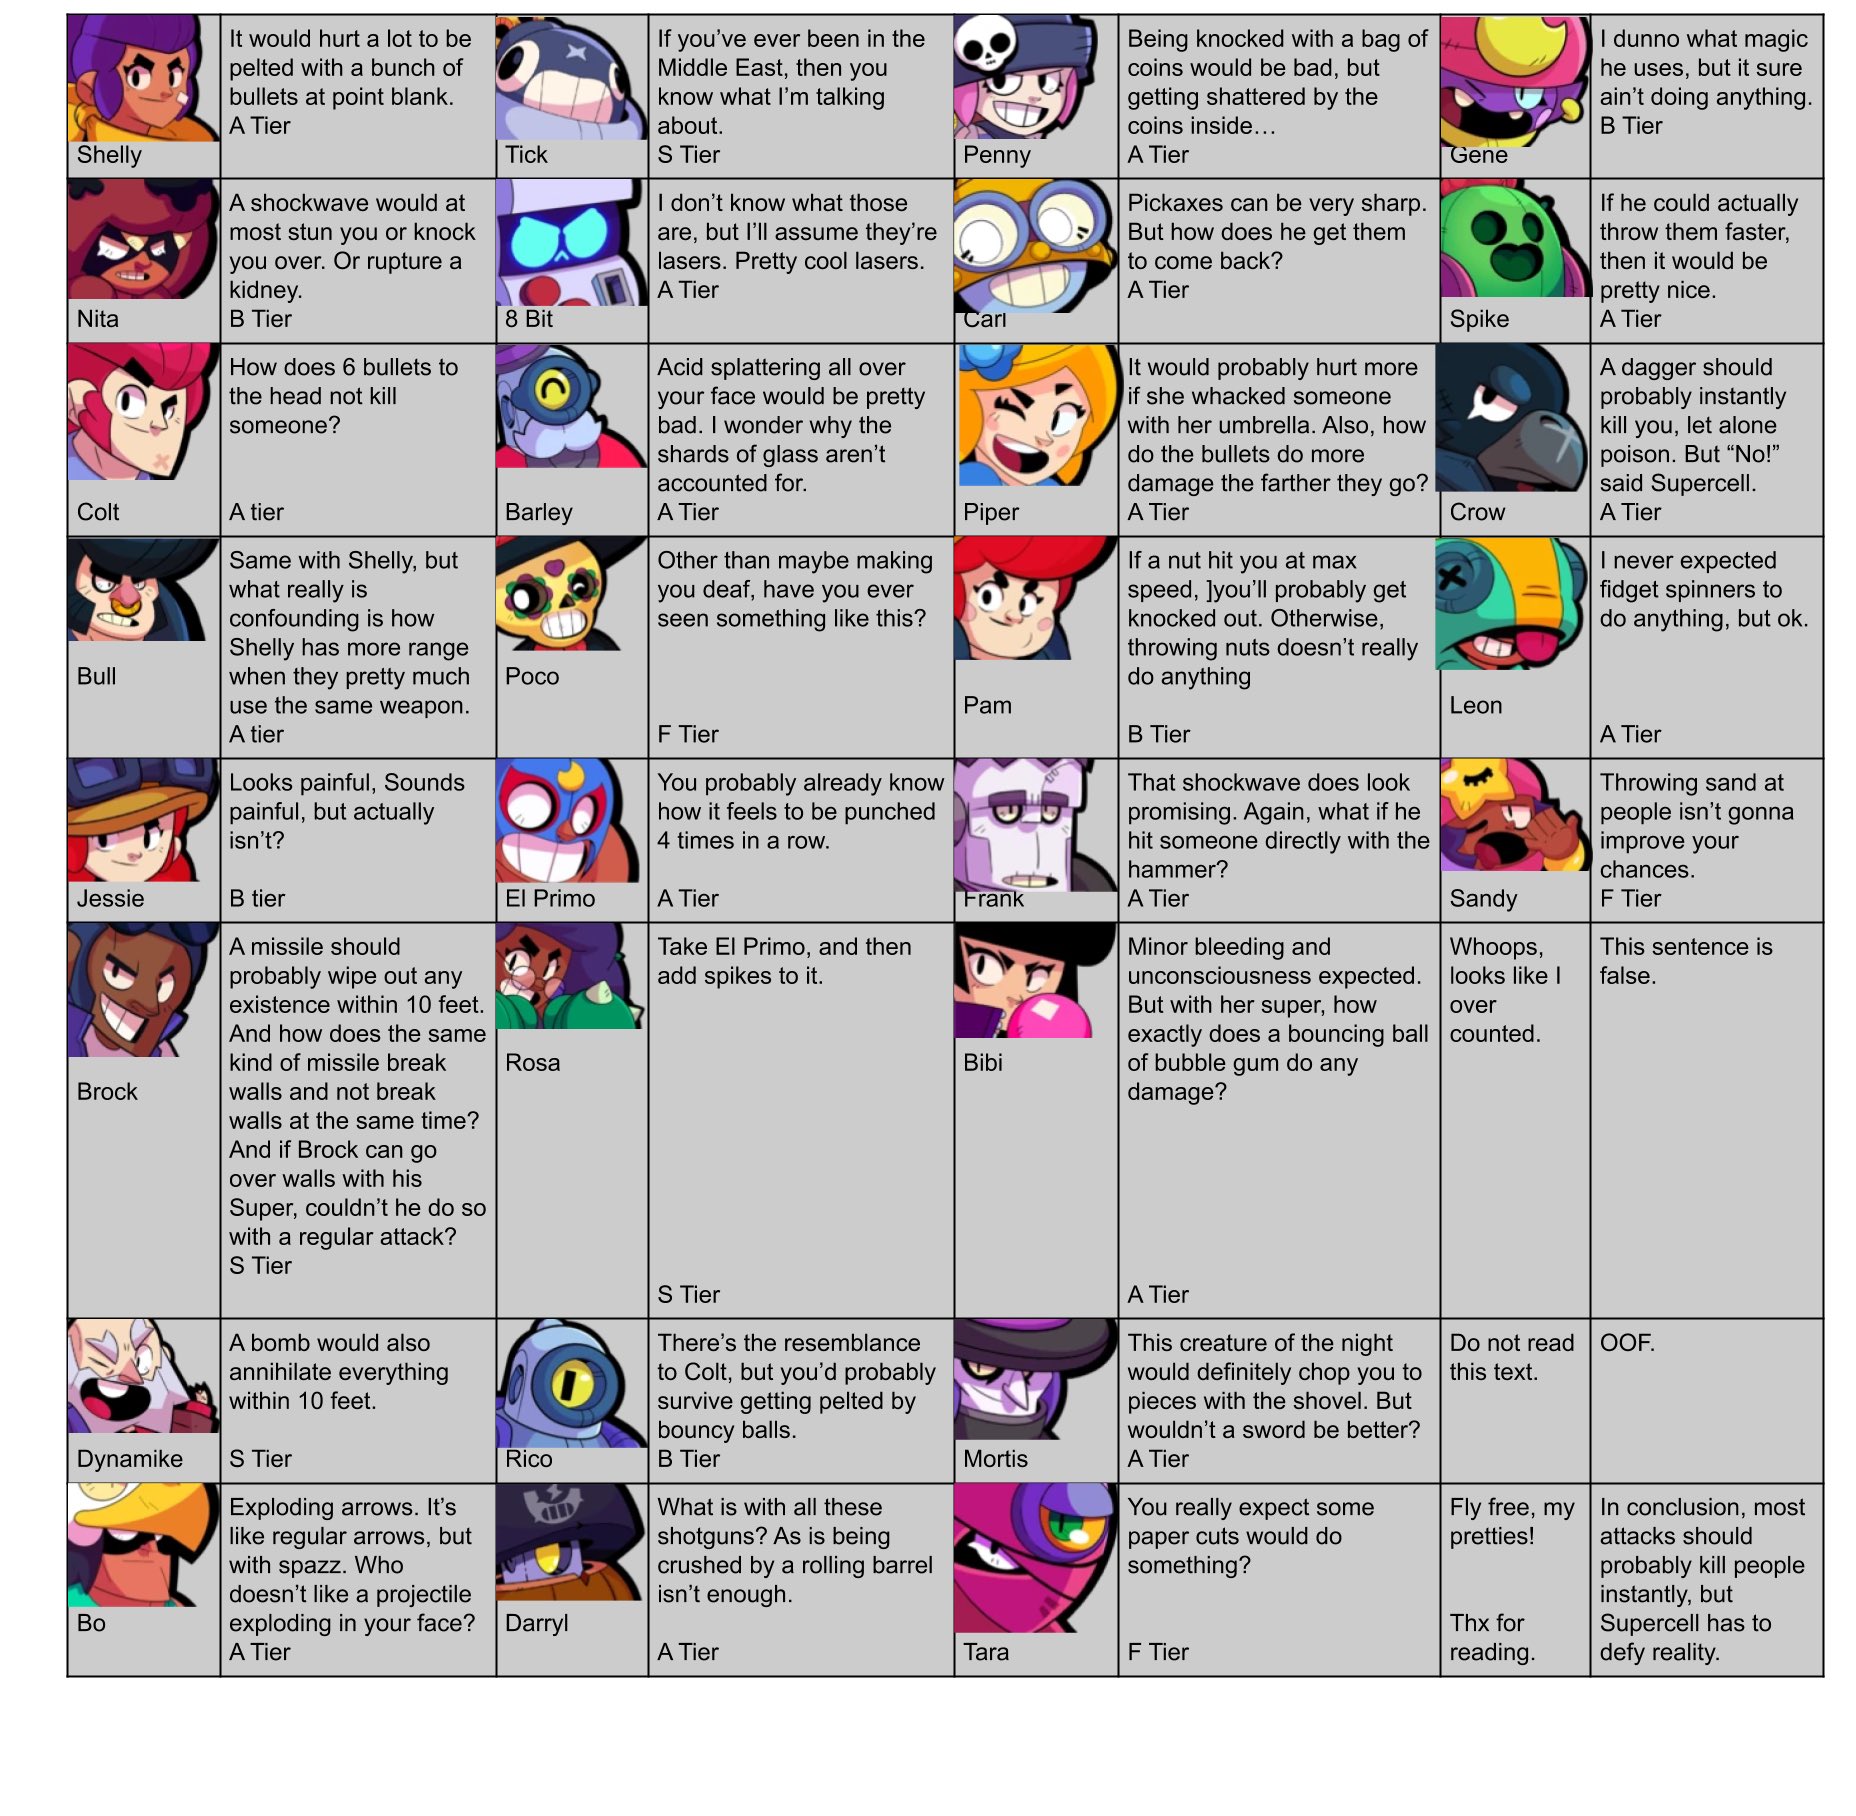 Code Ashbs On Twitter Tier List Of How Lethal Every Brawler S Attack Are Funny How Brock Has One Of The Deadliest Attacks But Does Little Damage In Comparison Https T Co W0mqsiqn7e Brawlstars Https T Co Ykv2hfrlo7 - tier list brawl stars brawlers